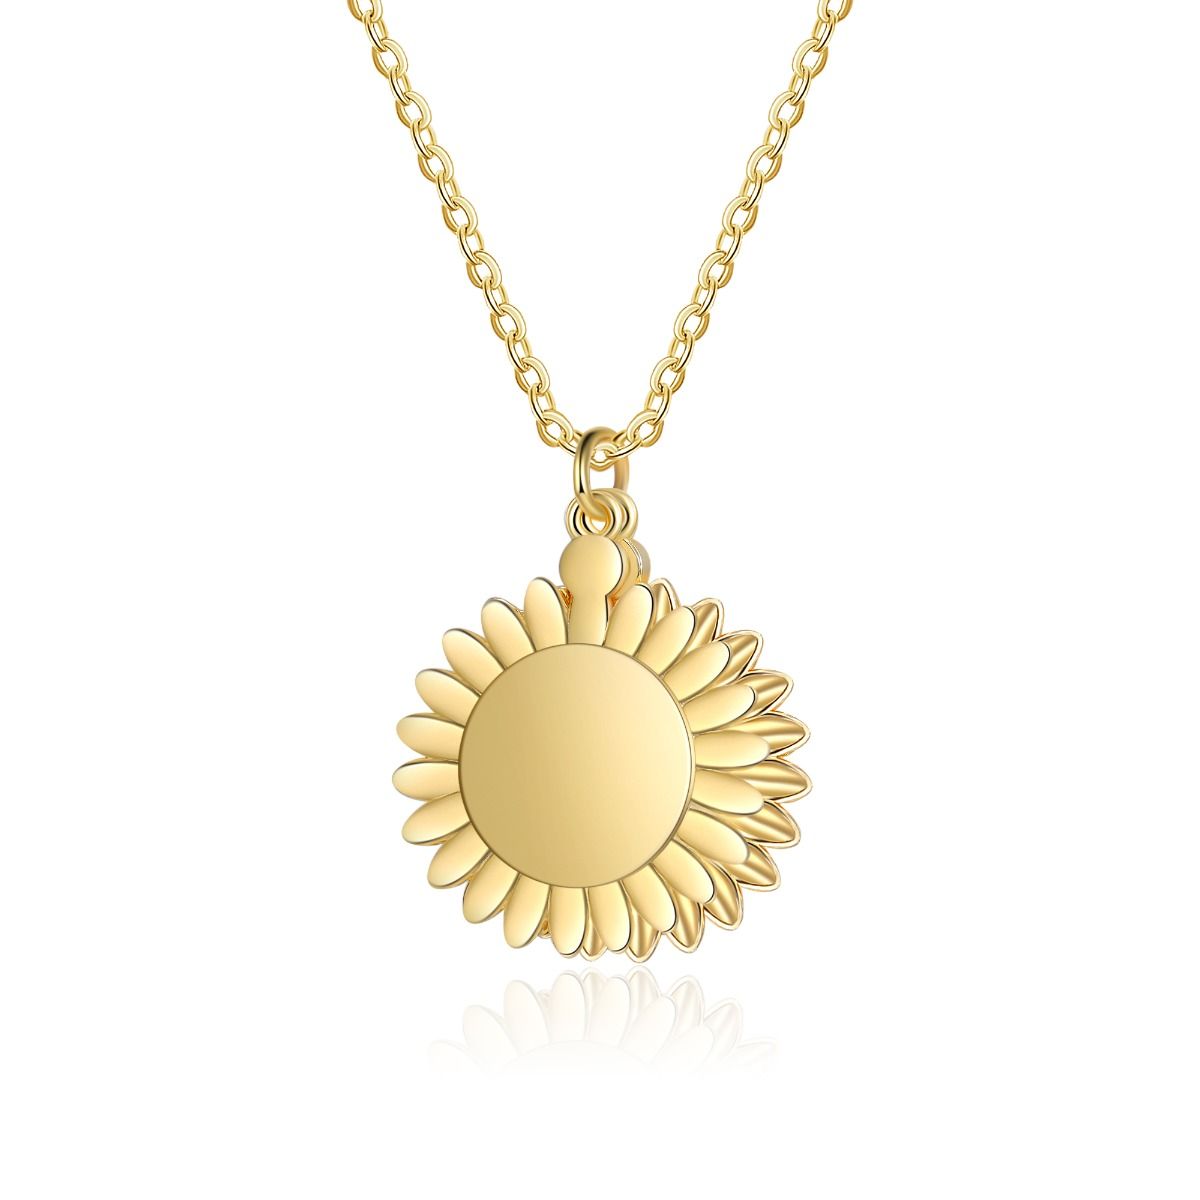 Personalised Sun Flower Photo Necklace With Birthstone | Bespoke Photo Necklace